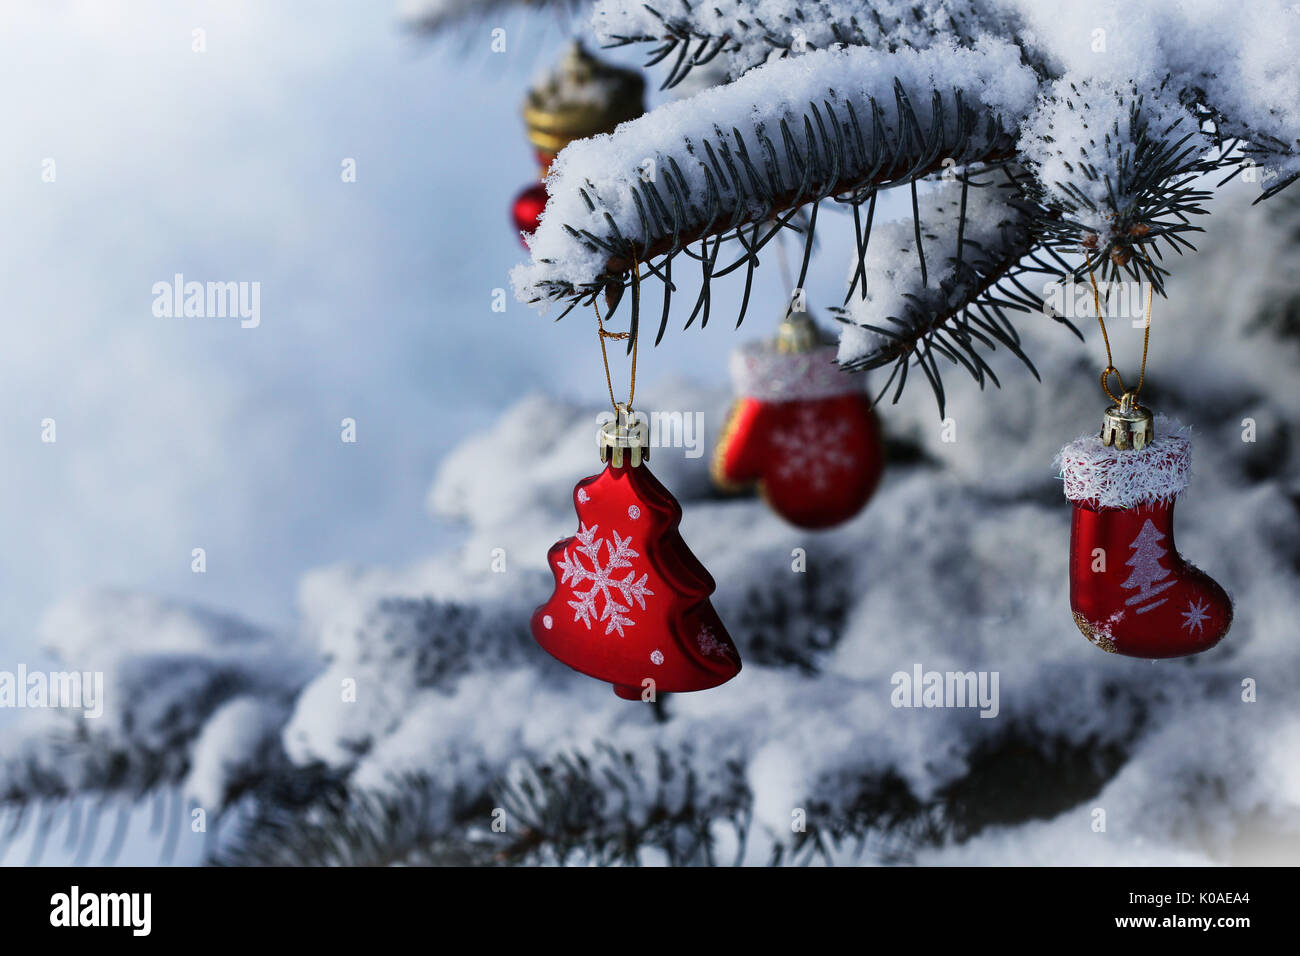 Natural fir tree covered with snow.. Christmas decoration hanging on fir tree branch Stock Photo